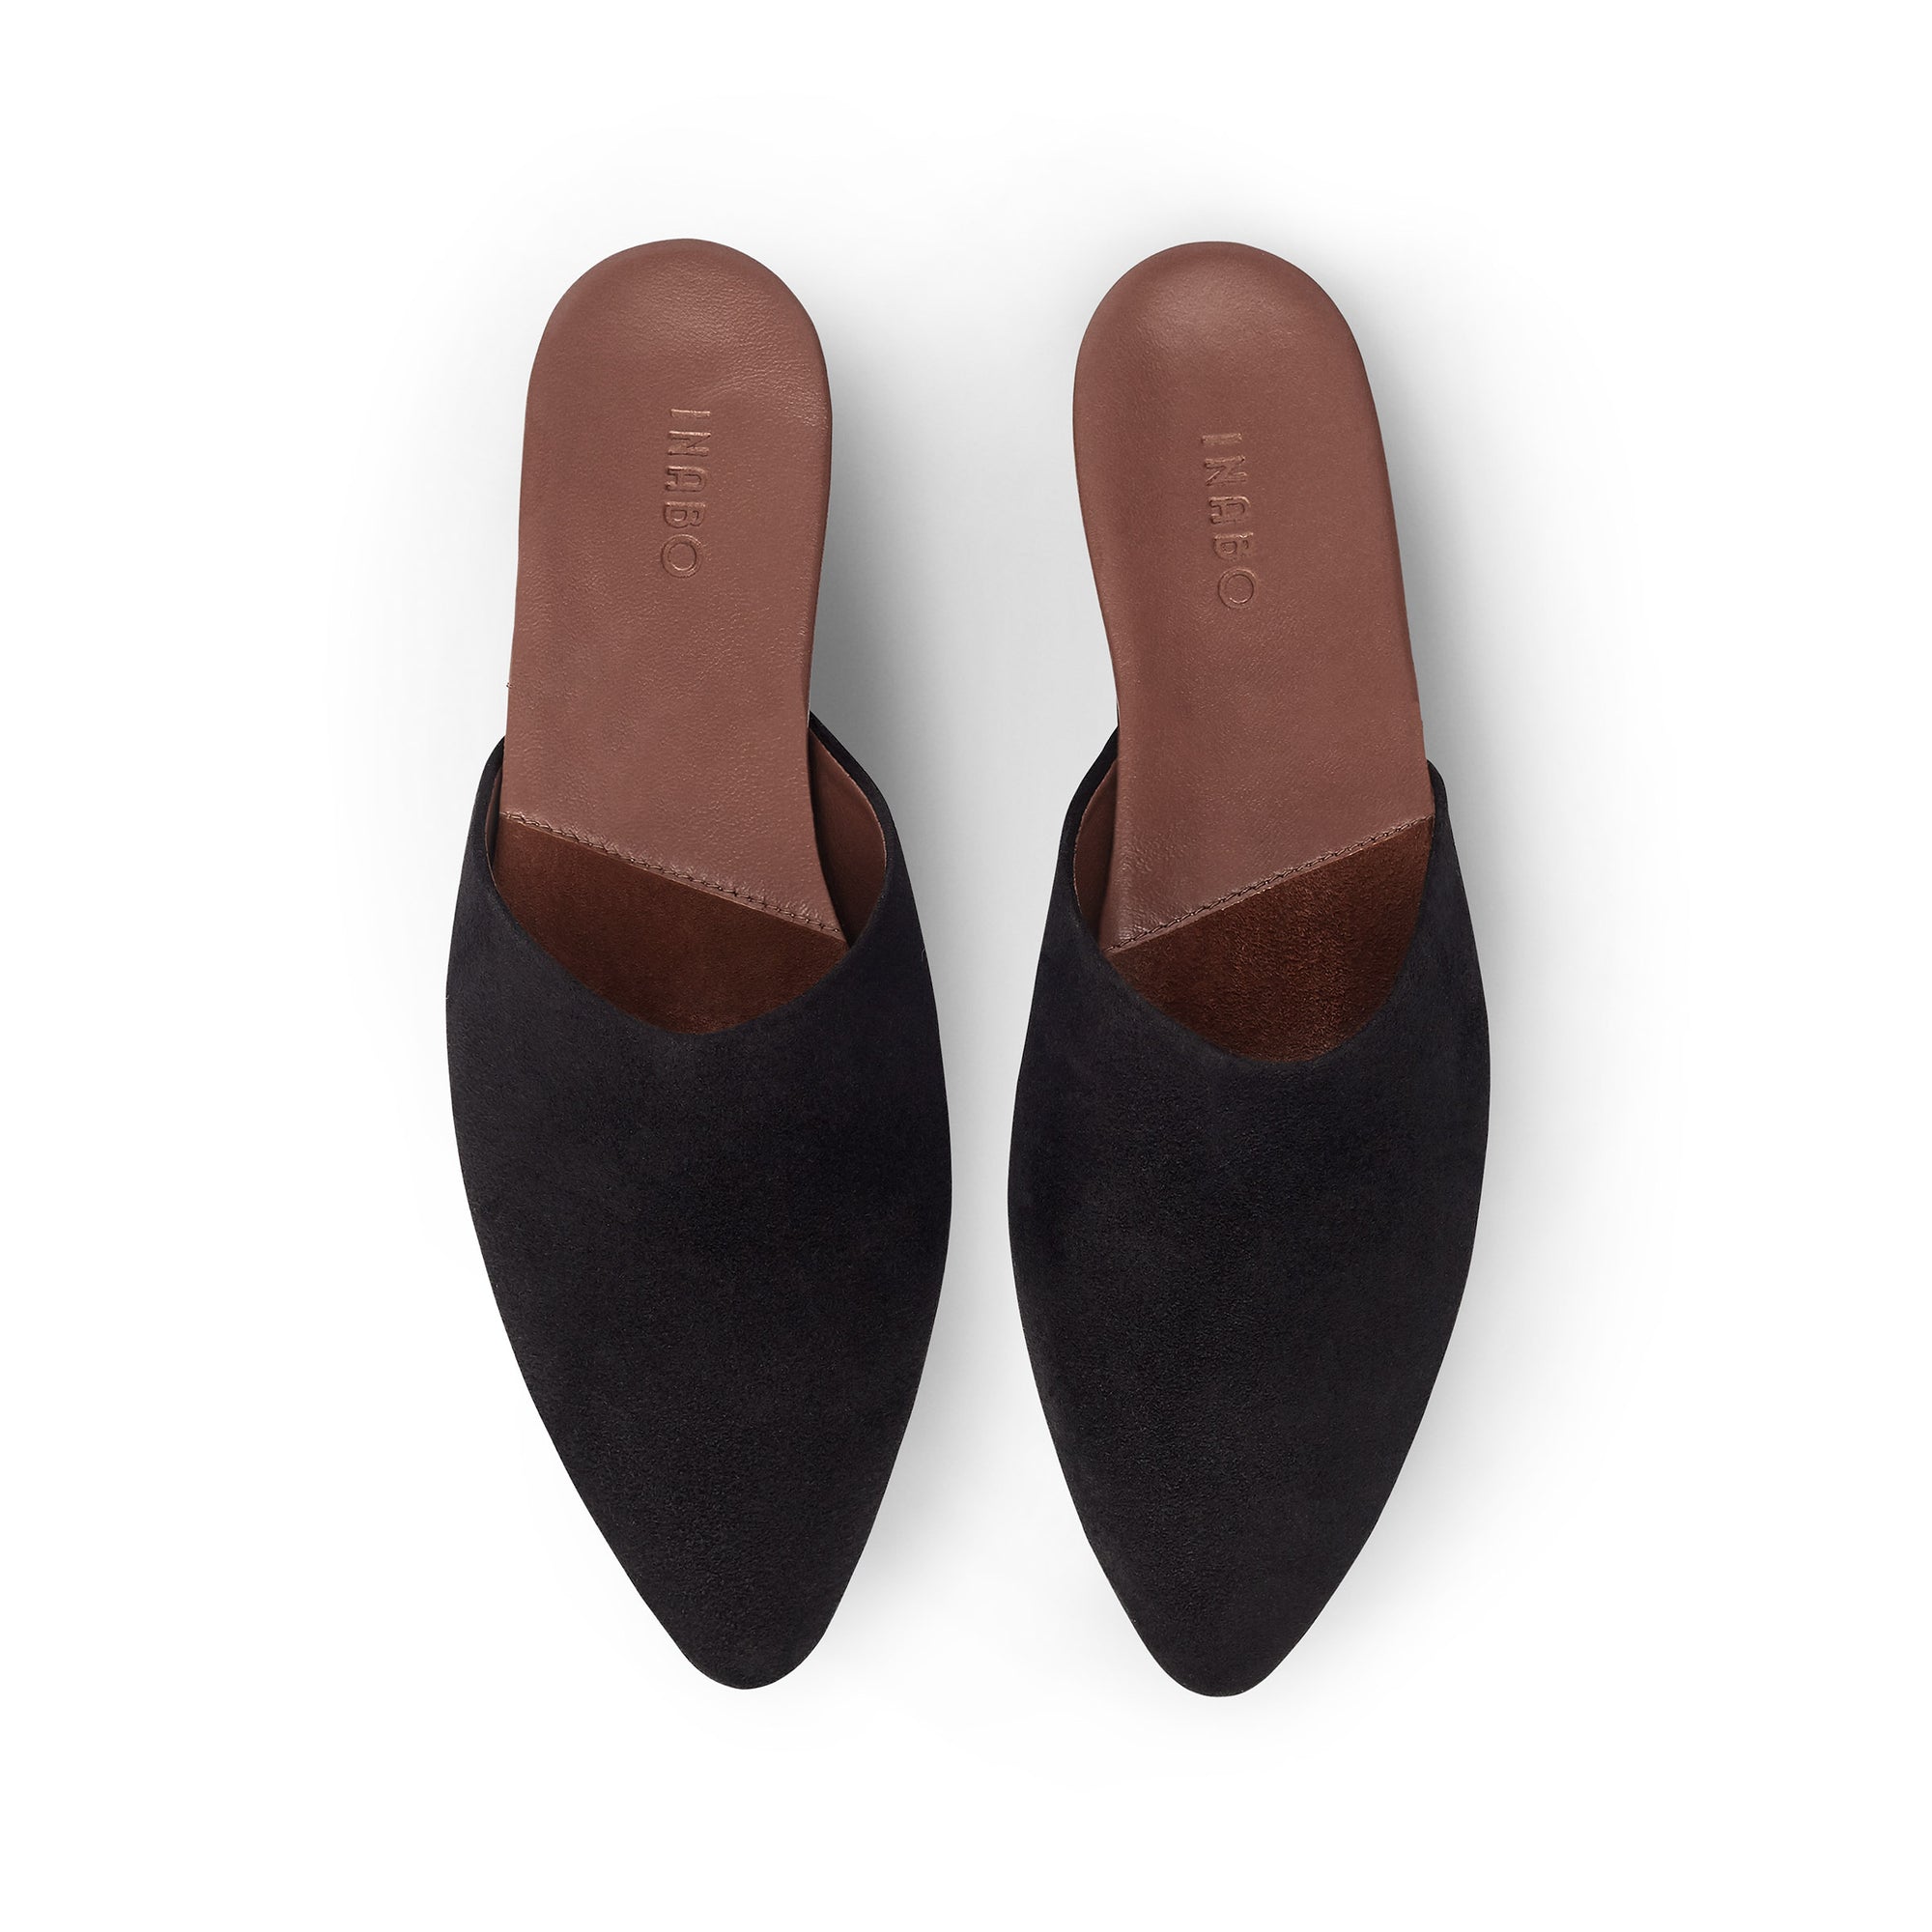 Inabo Women's Slider slipper in black suede and brown leather insole shown from above